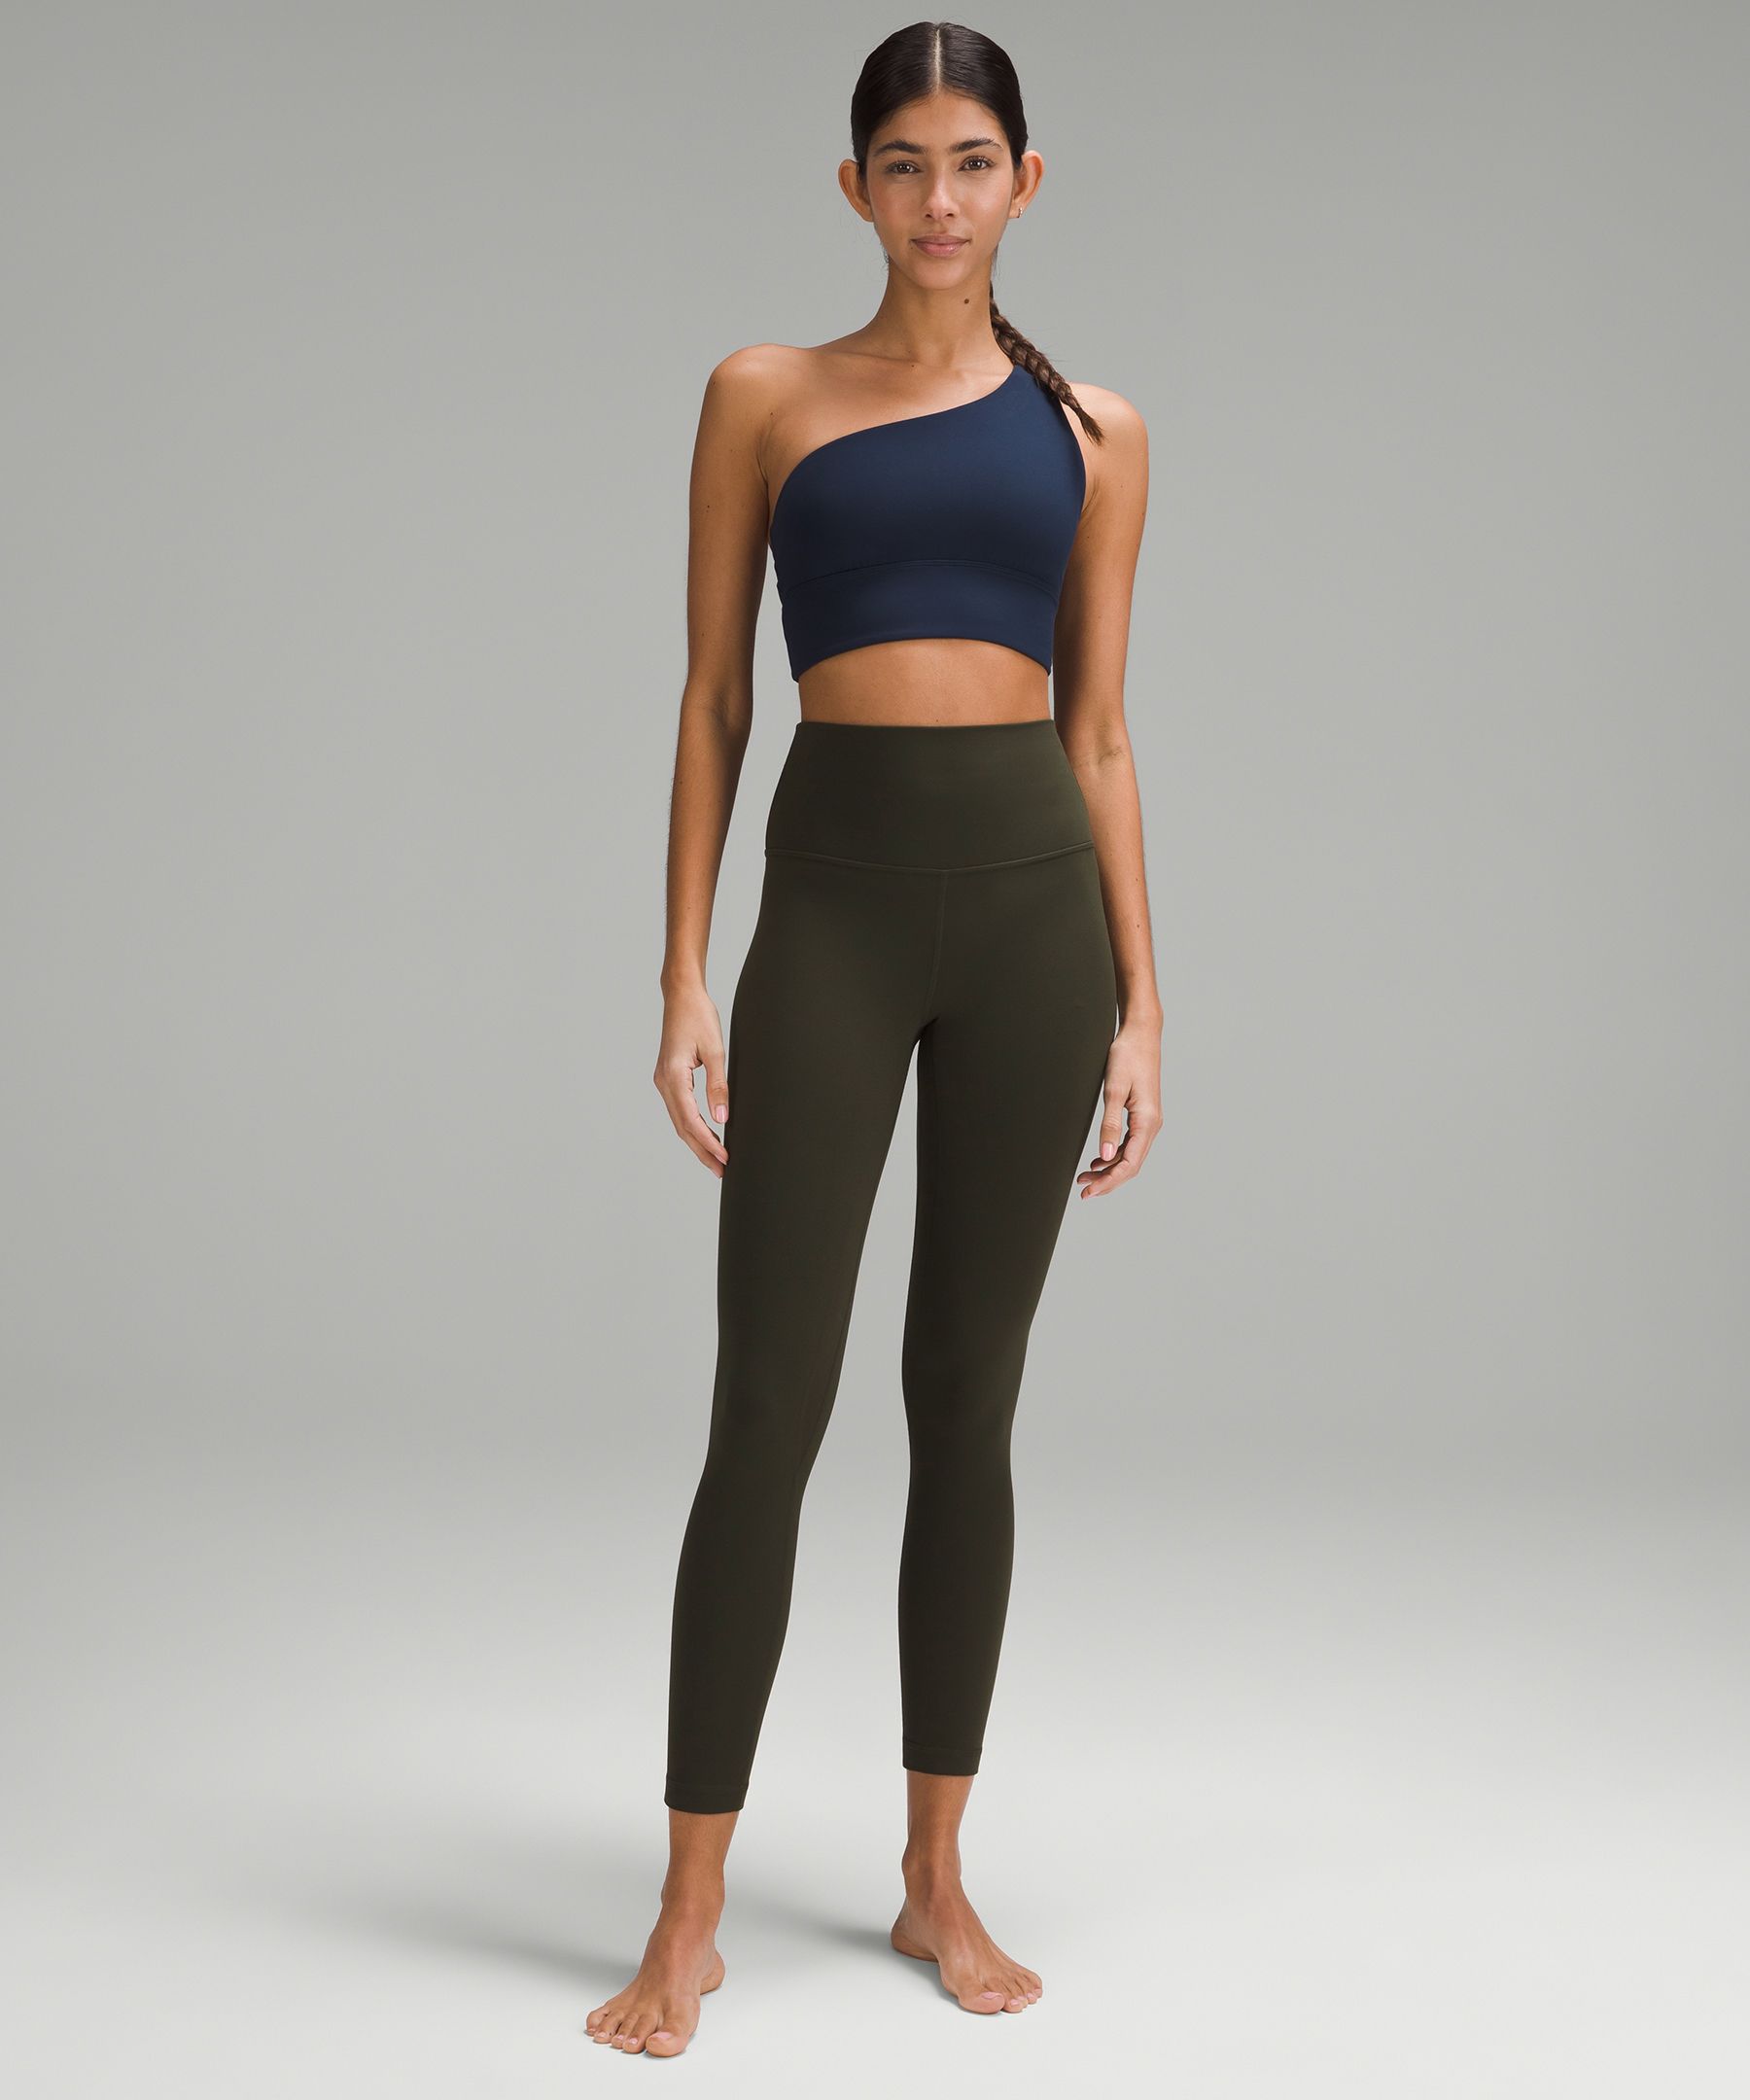 Track lululemon Align™ High-Rise Pant with Pockets 25 - Palm Court 